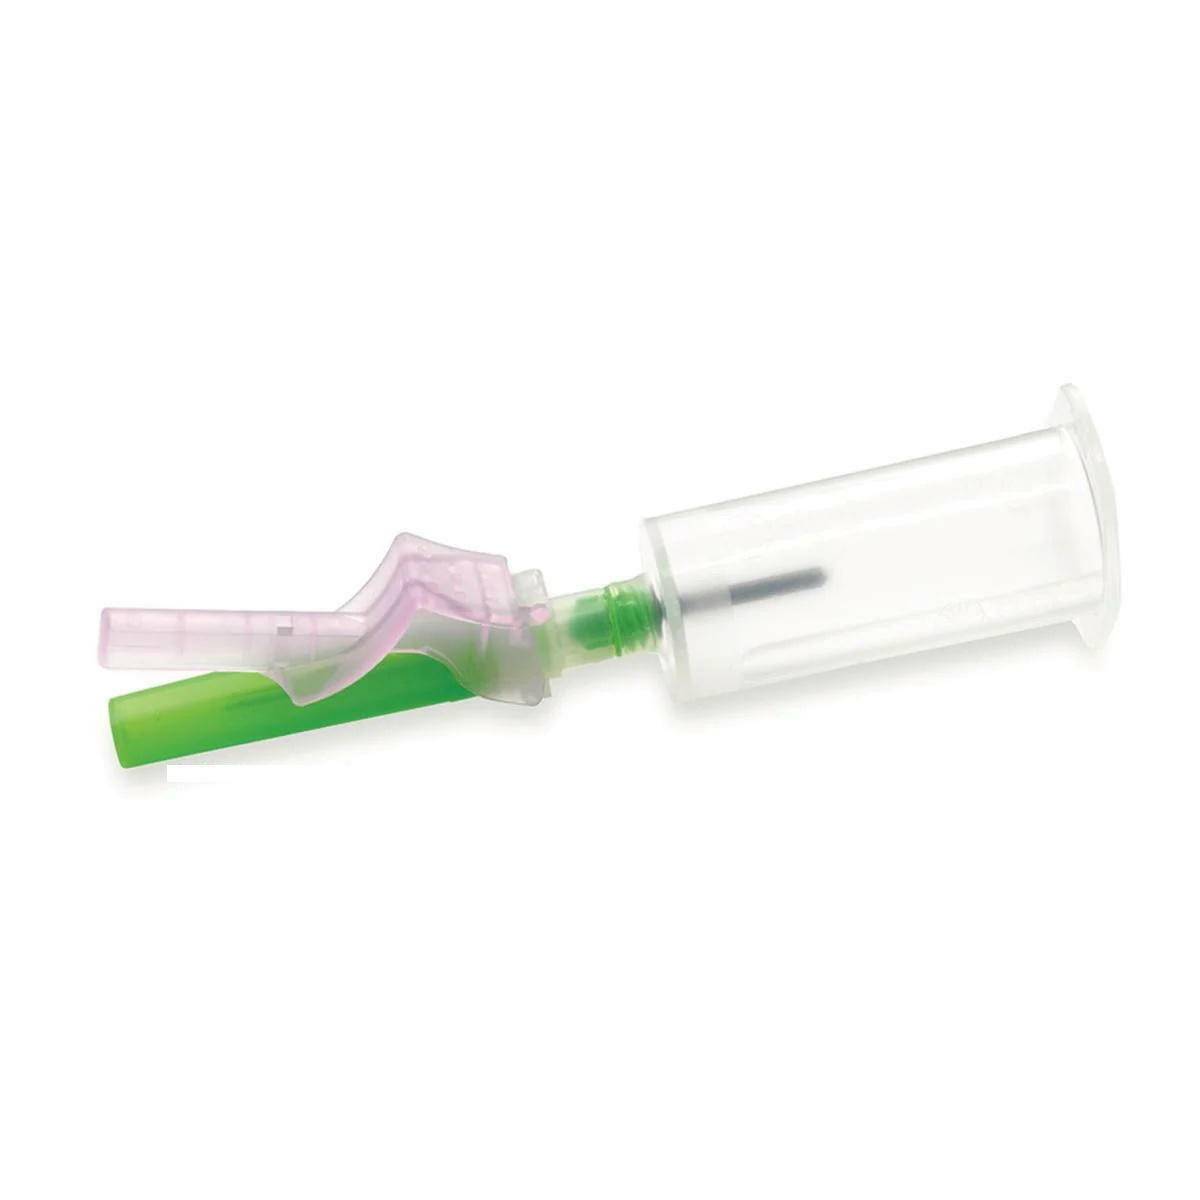 22g 1.25 inch BD Vacutainer Eclipse Blood Collection Needle with Preattached Holder - UKMEDI